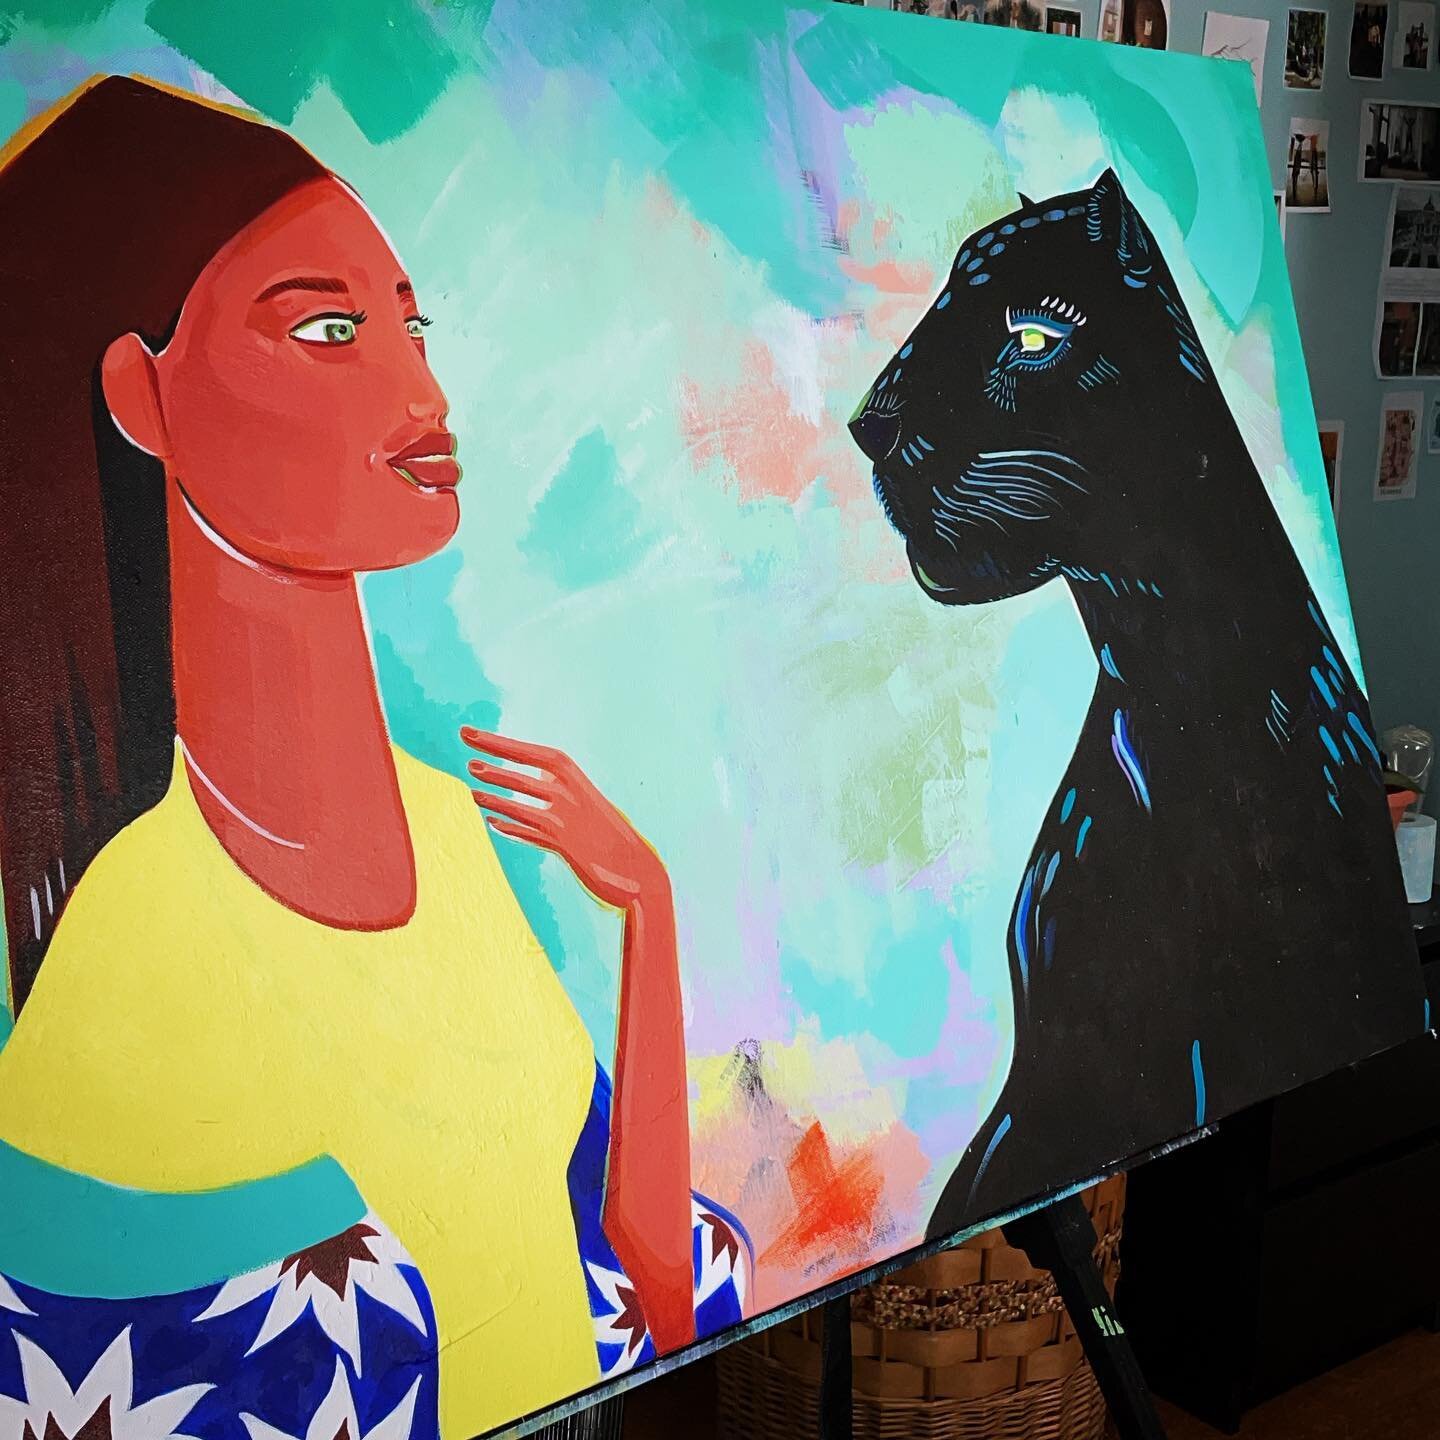 Just a little progress shot. The process of this painting has been moving slowly, but 💎✨ I&rsquo;ve been learning a lot more about the energy of guiding #animals through this piece.

#TheBlackJaguar
&ldquo;The Jaguar and I&rdquo;
24&rdquo; x 36&rdqu